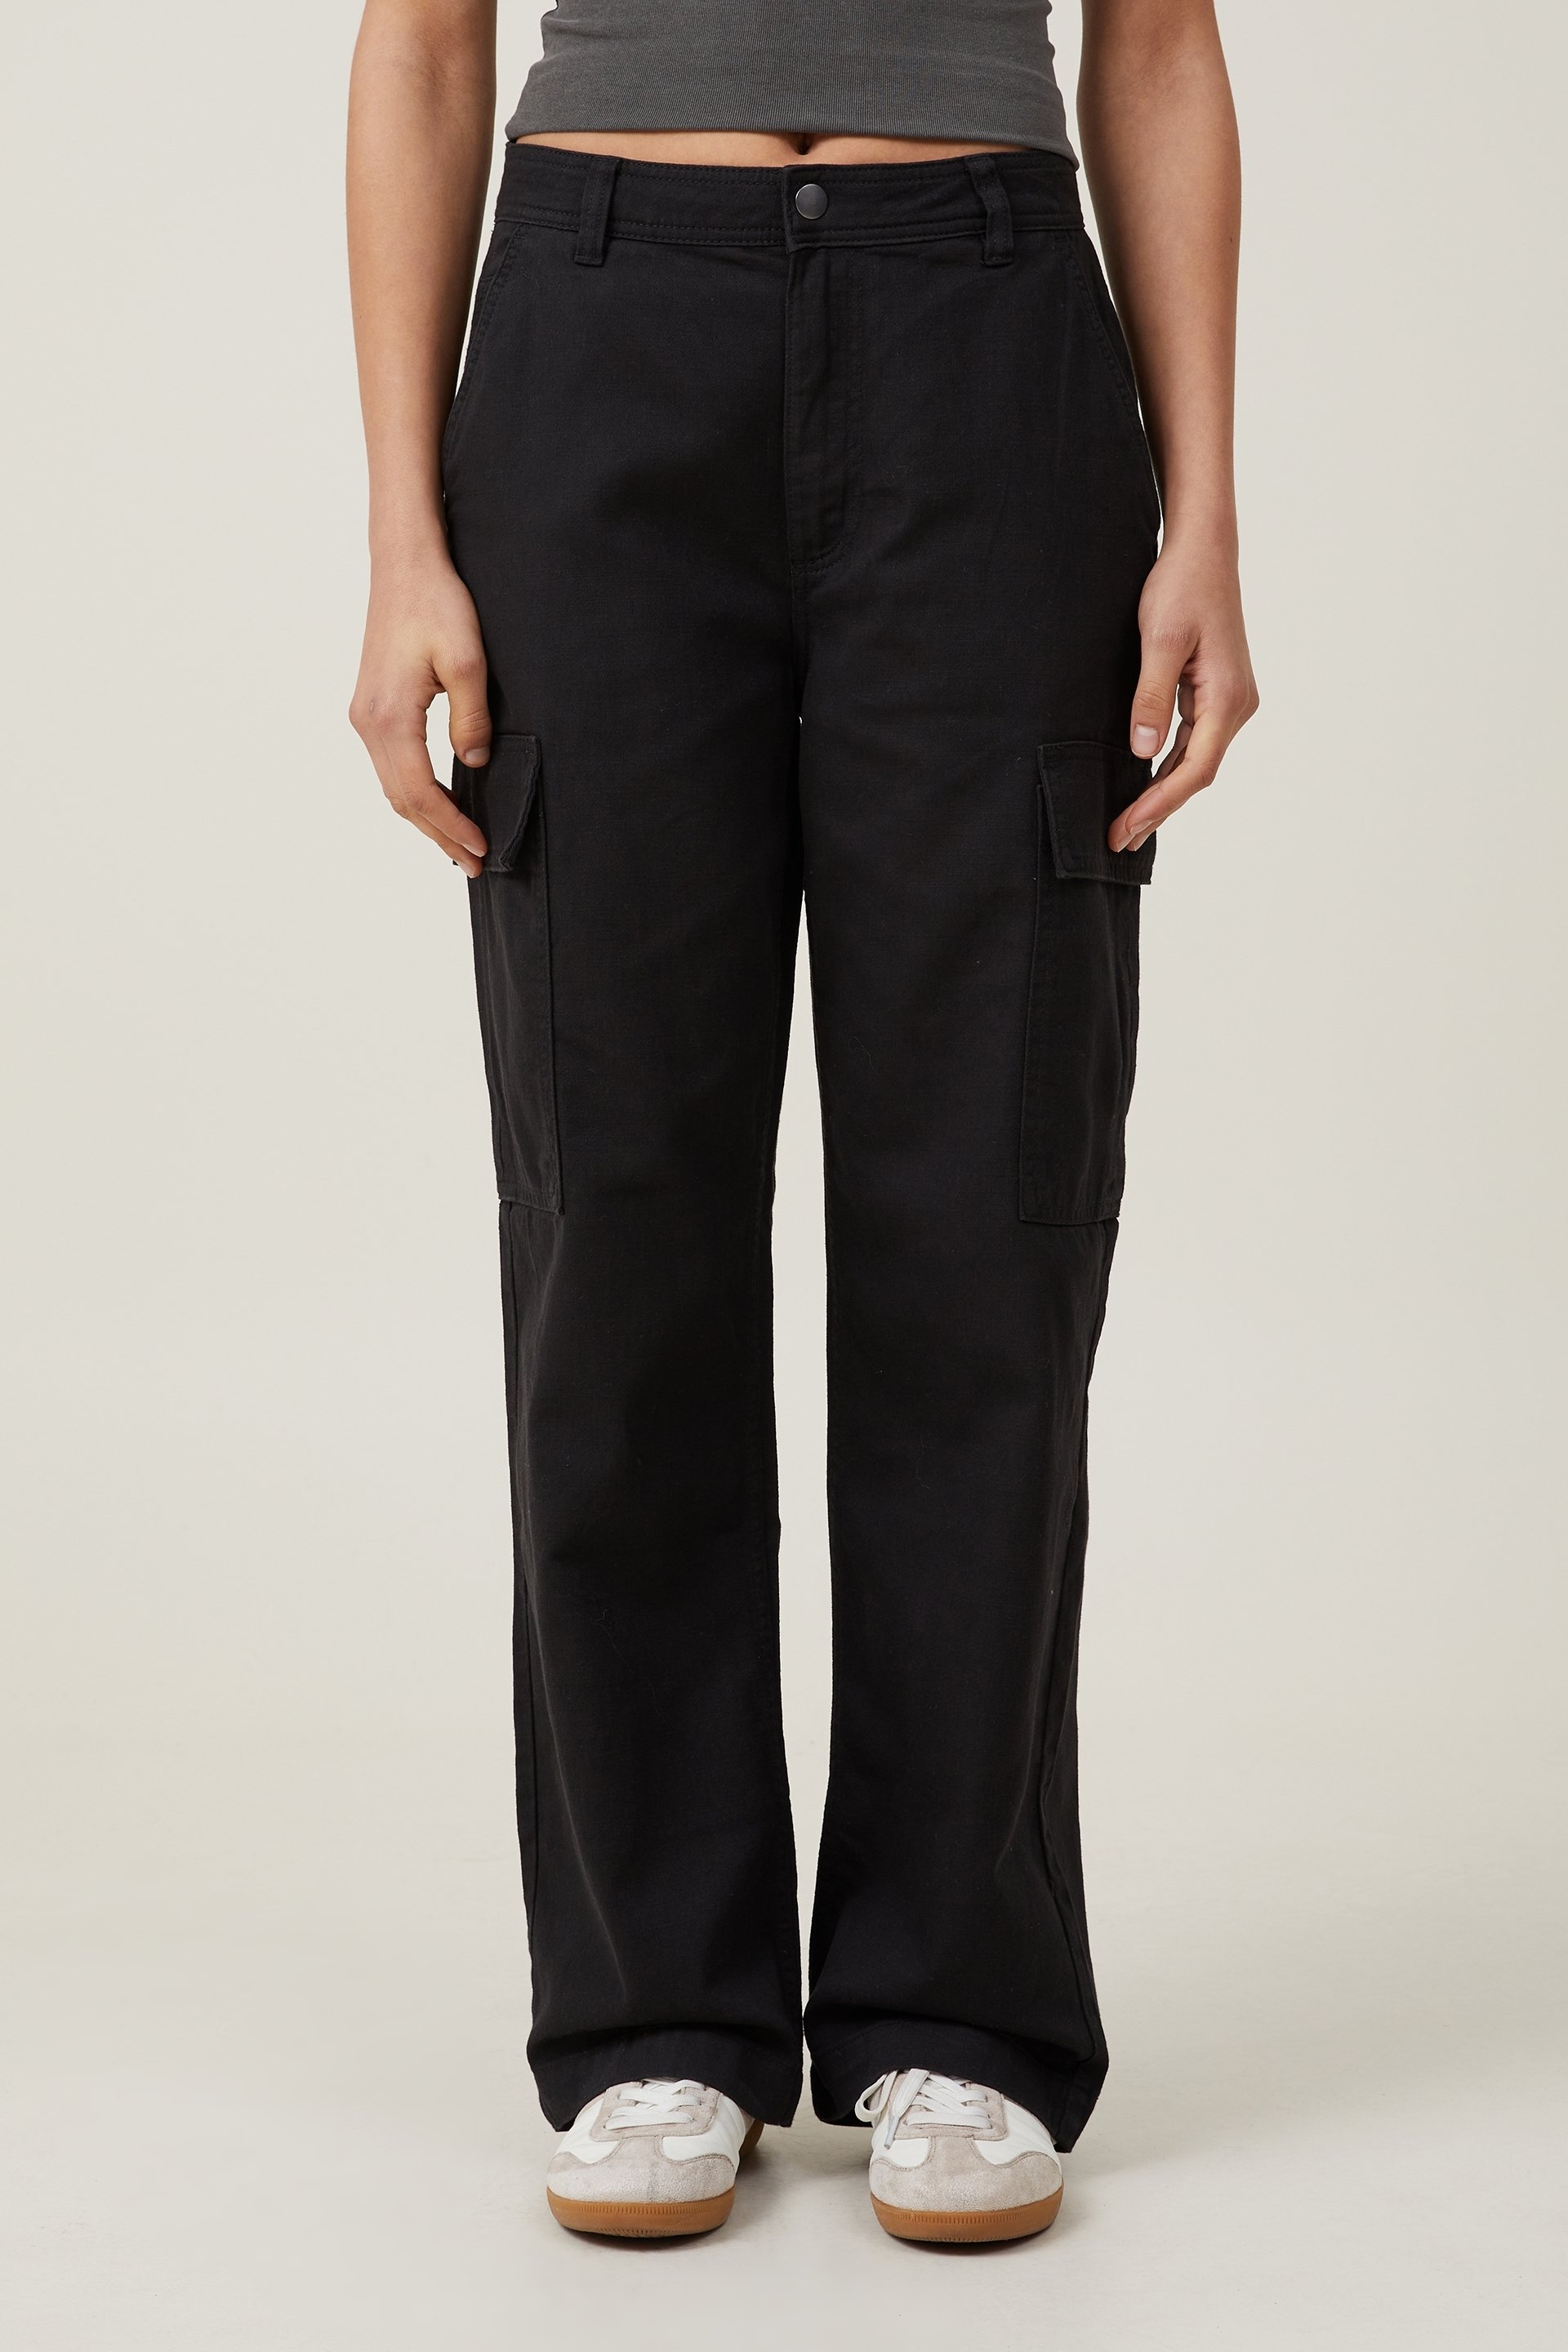 Cotton On Maternity cargo pants in black